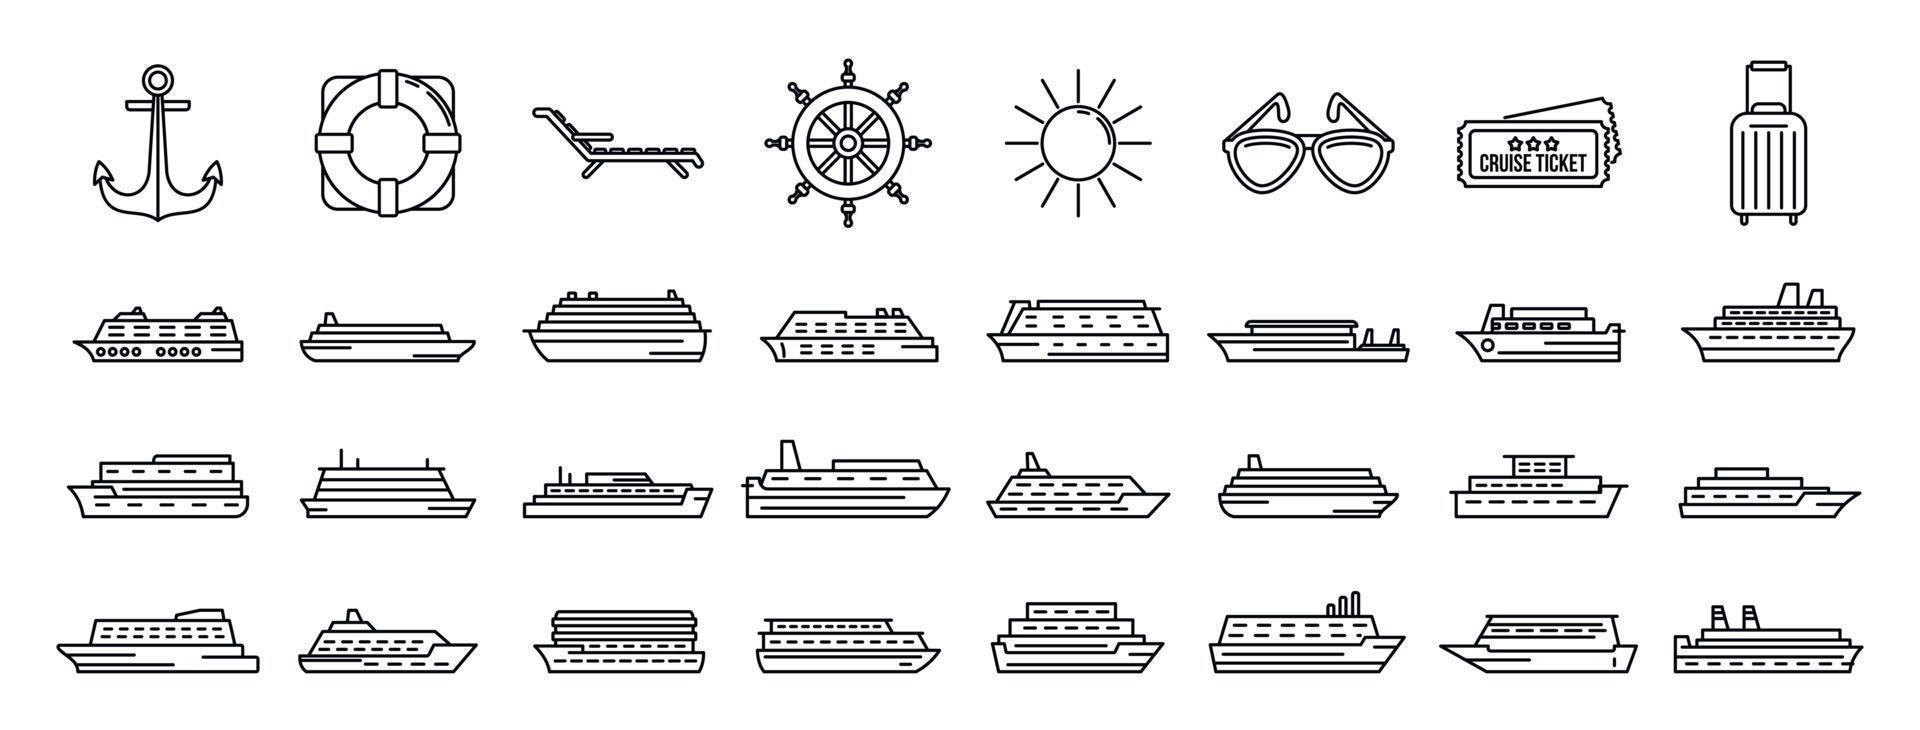 Ocean cruise icons set, outline style vector